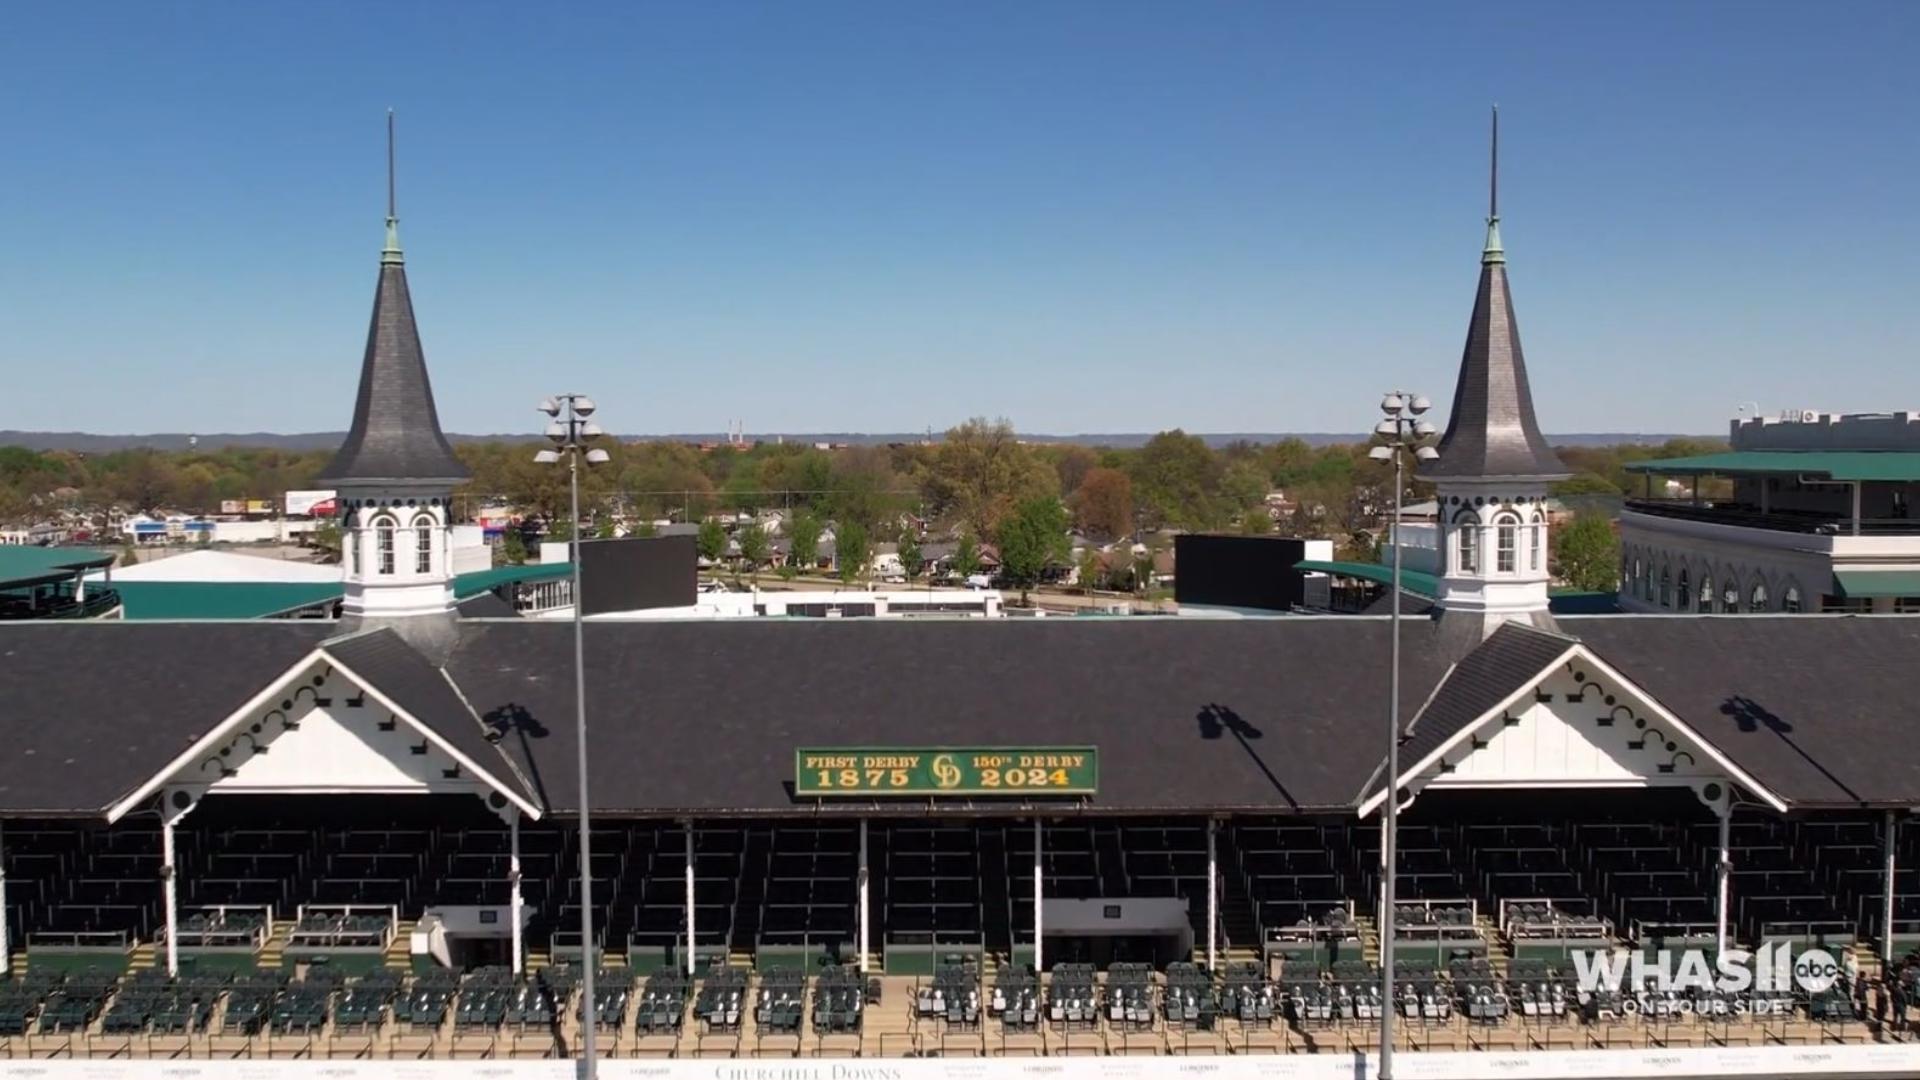 WHAS11 uncovers the mystery of how the Twin Spires came to be at Churchill Downs.